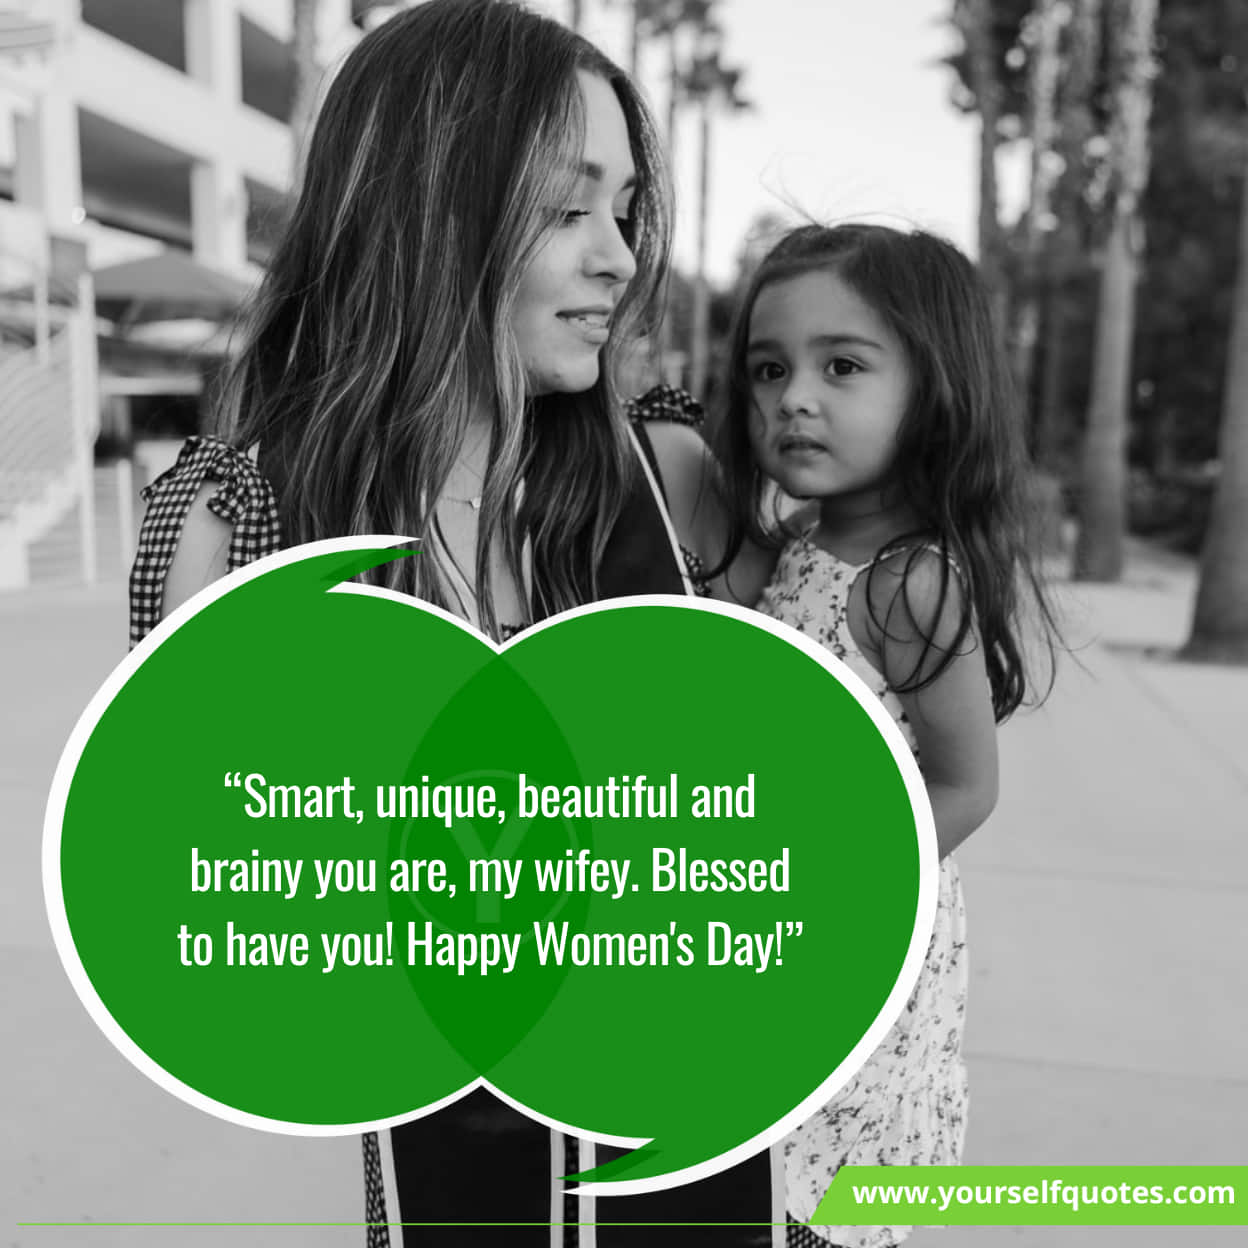 Happy Women's Day Wishes, Messages Quotes 